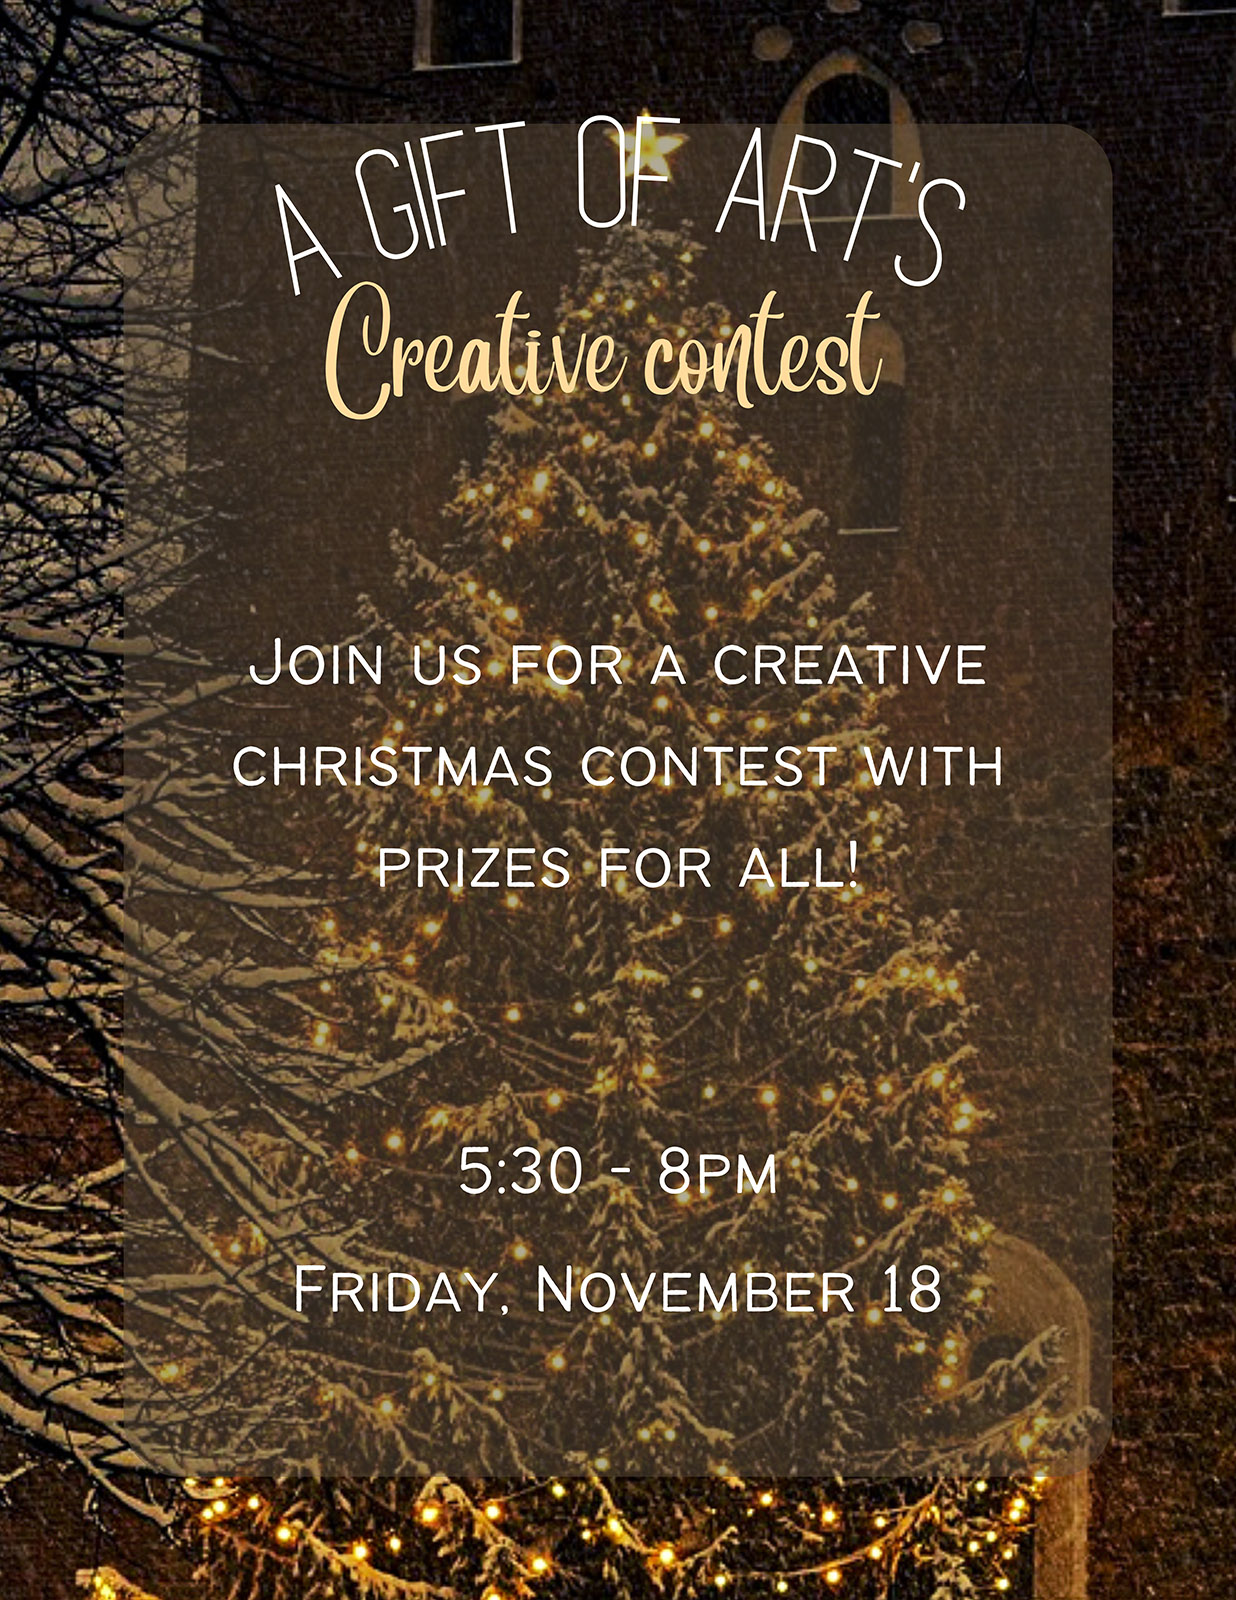 A Gift of Art's Creative Christmas Contest